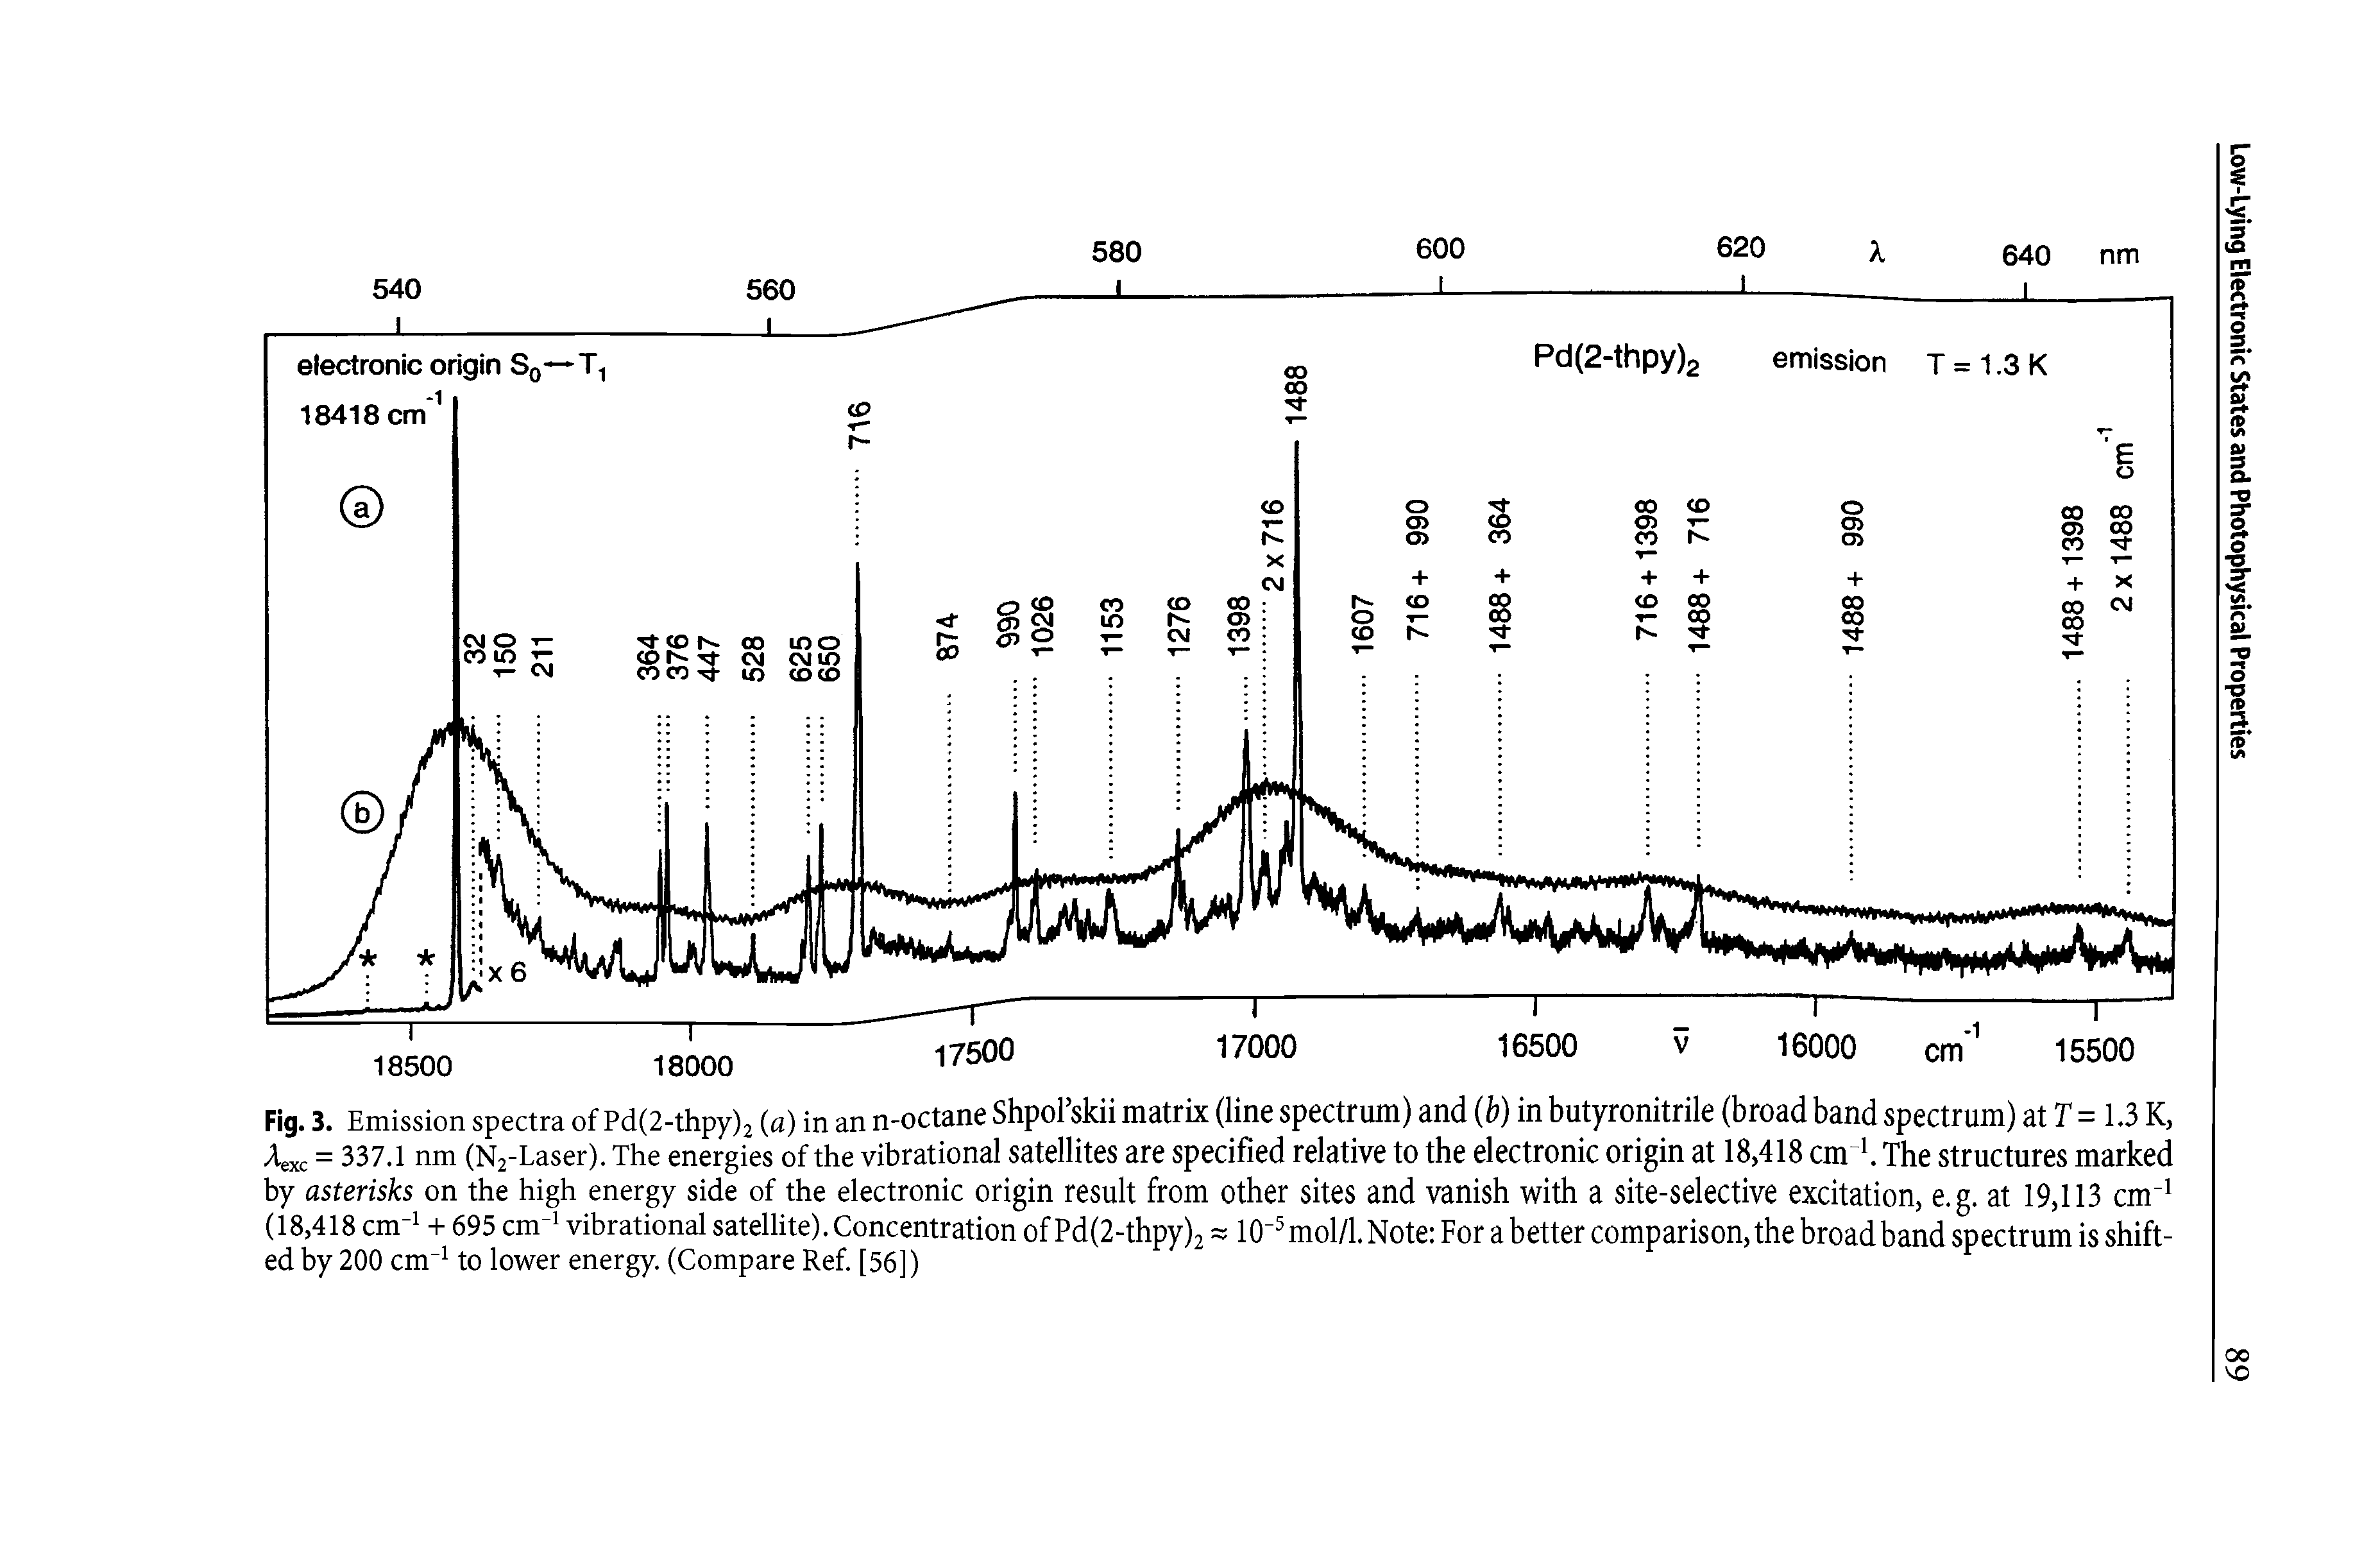 Fig. 3. Emission spectra of Pd(2-thpy)2 (a) in an n-octane Shpol skii matrix (line spectrum) and (b) in butyronitrile (broad band spectrum) at T = 1.3 K, Aexc = 337.1 nm (N2-Laser). The energies of the vibrational satellites are specified relative to the electronic origin at 18,418 cm f The structures marked by asterisks on the high energy side of the electronic origin result from other sites and vanish with a site-selective excitation, e.g. at 19,113 cm (18,418 cm i -1-695 cm vibrational satellite). Concentration of Pd(2-thpy)2 10 mol/1. Note Fora better comparison, the broad band spectrum is shifted by 200 cm to lower energy. (Compare Ref. [56])...